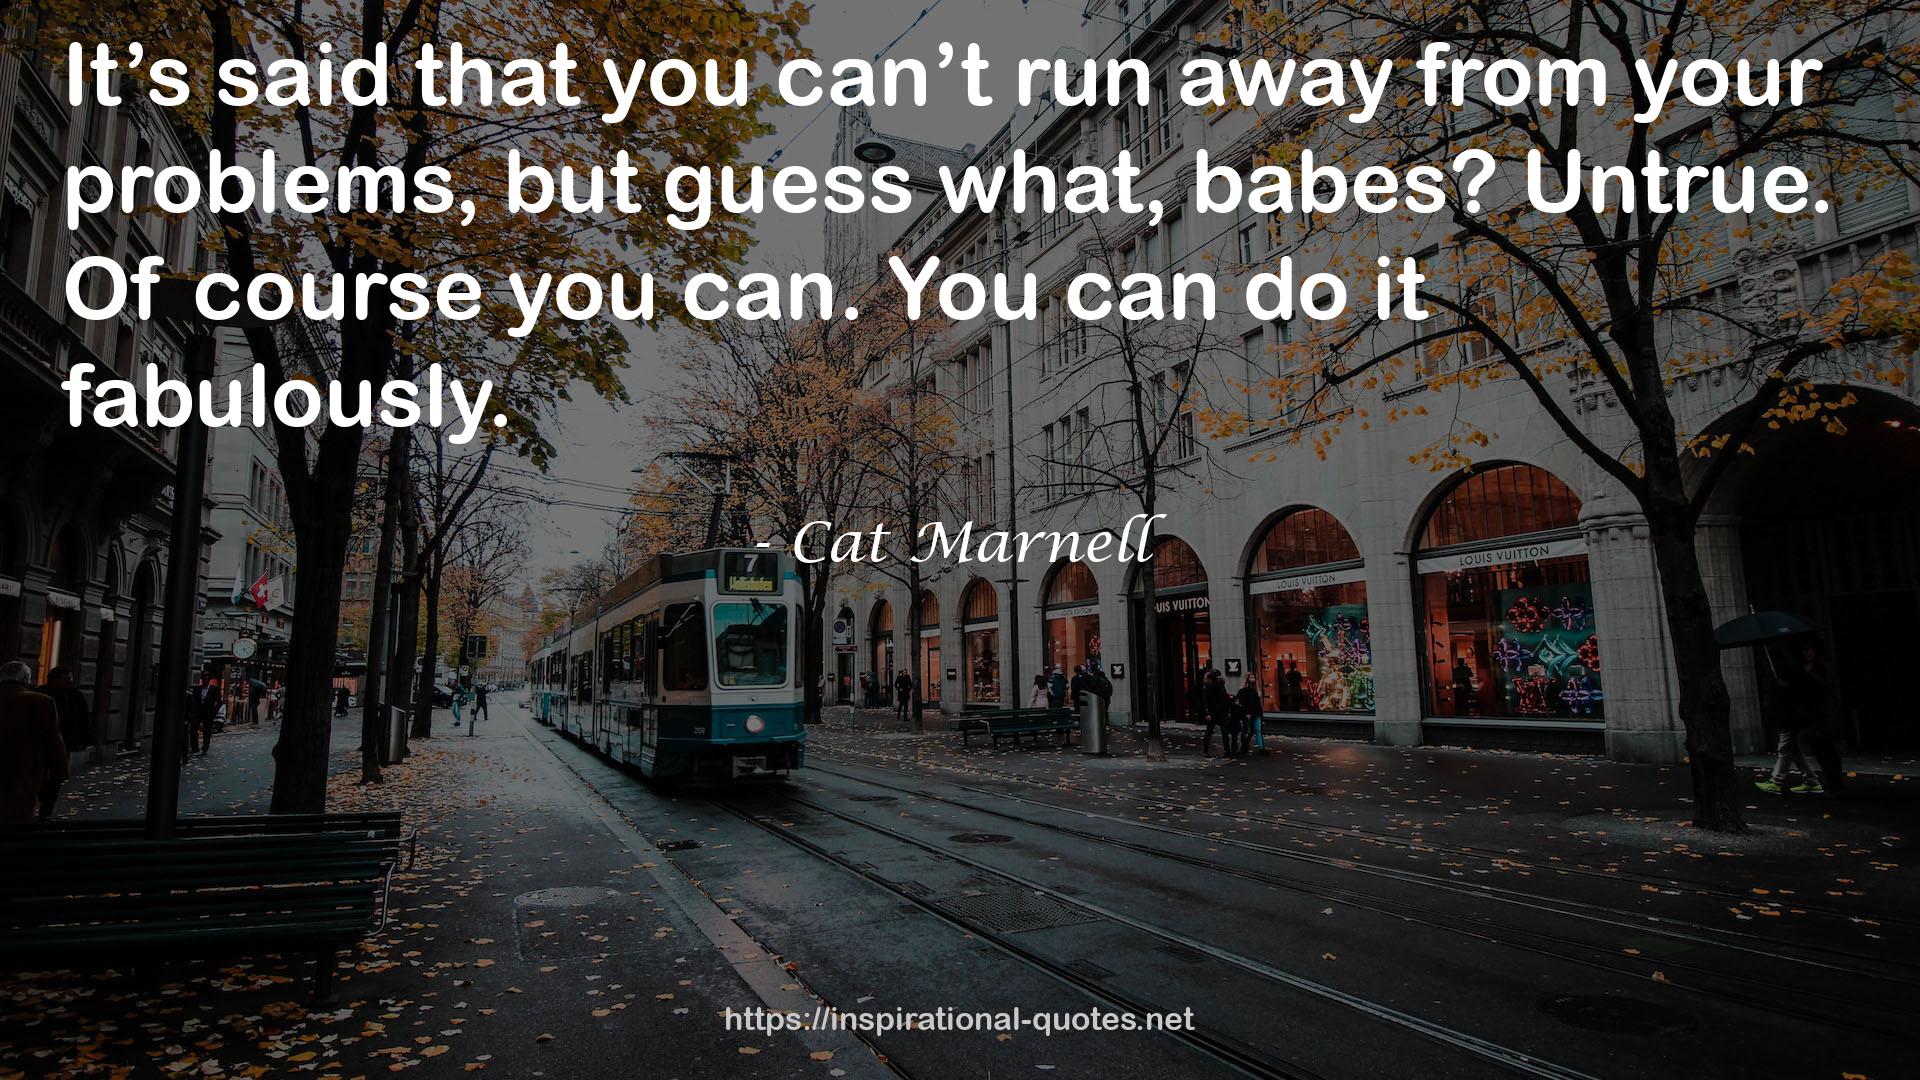 Cat Marnell QUOTES